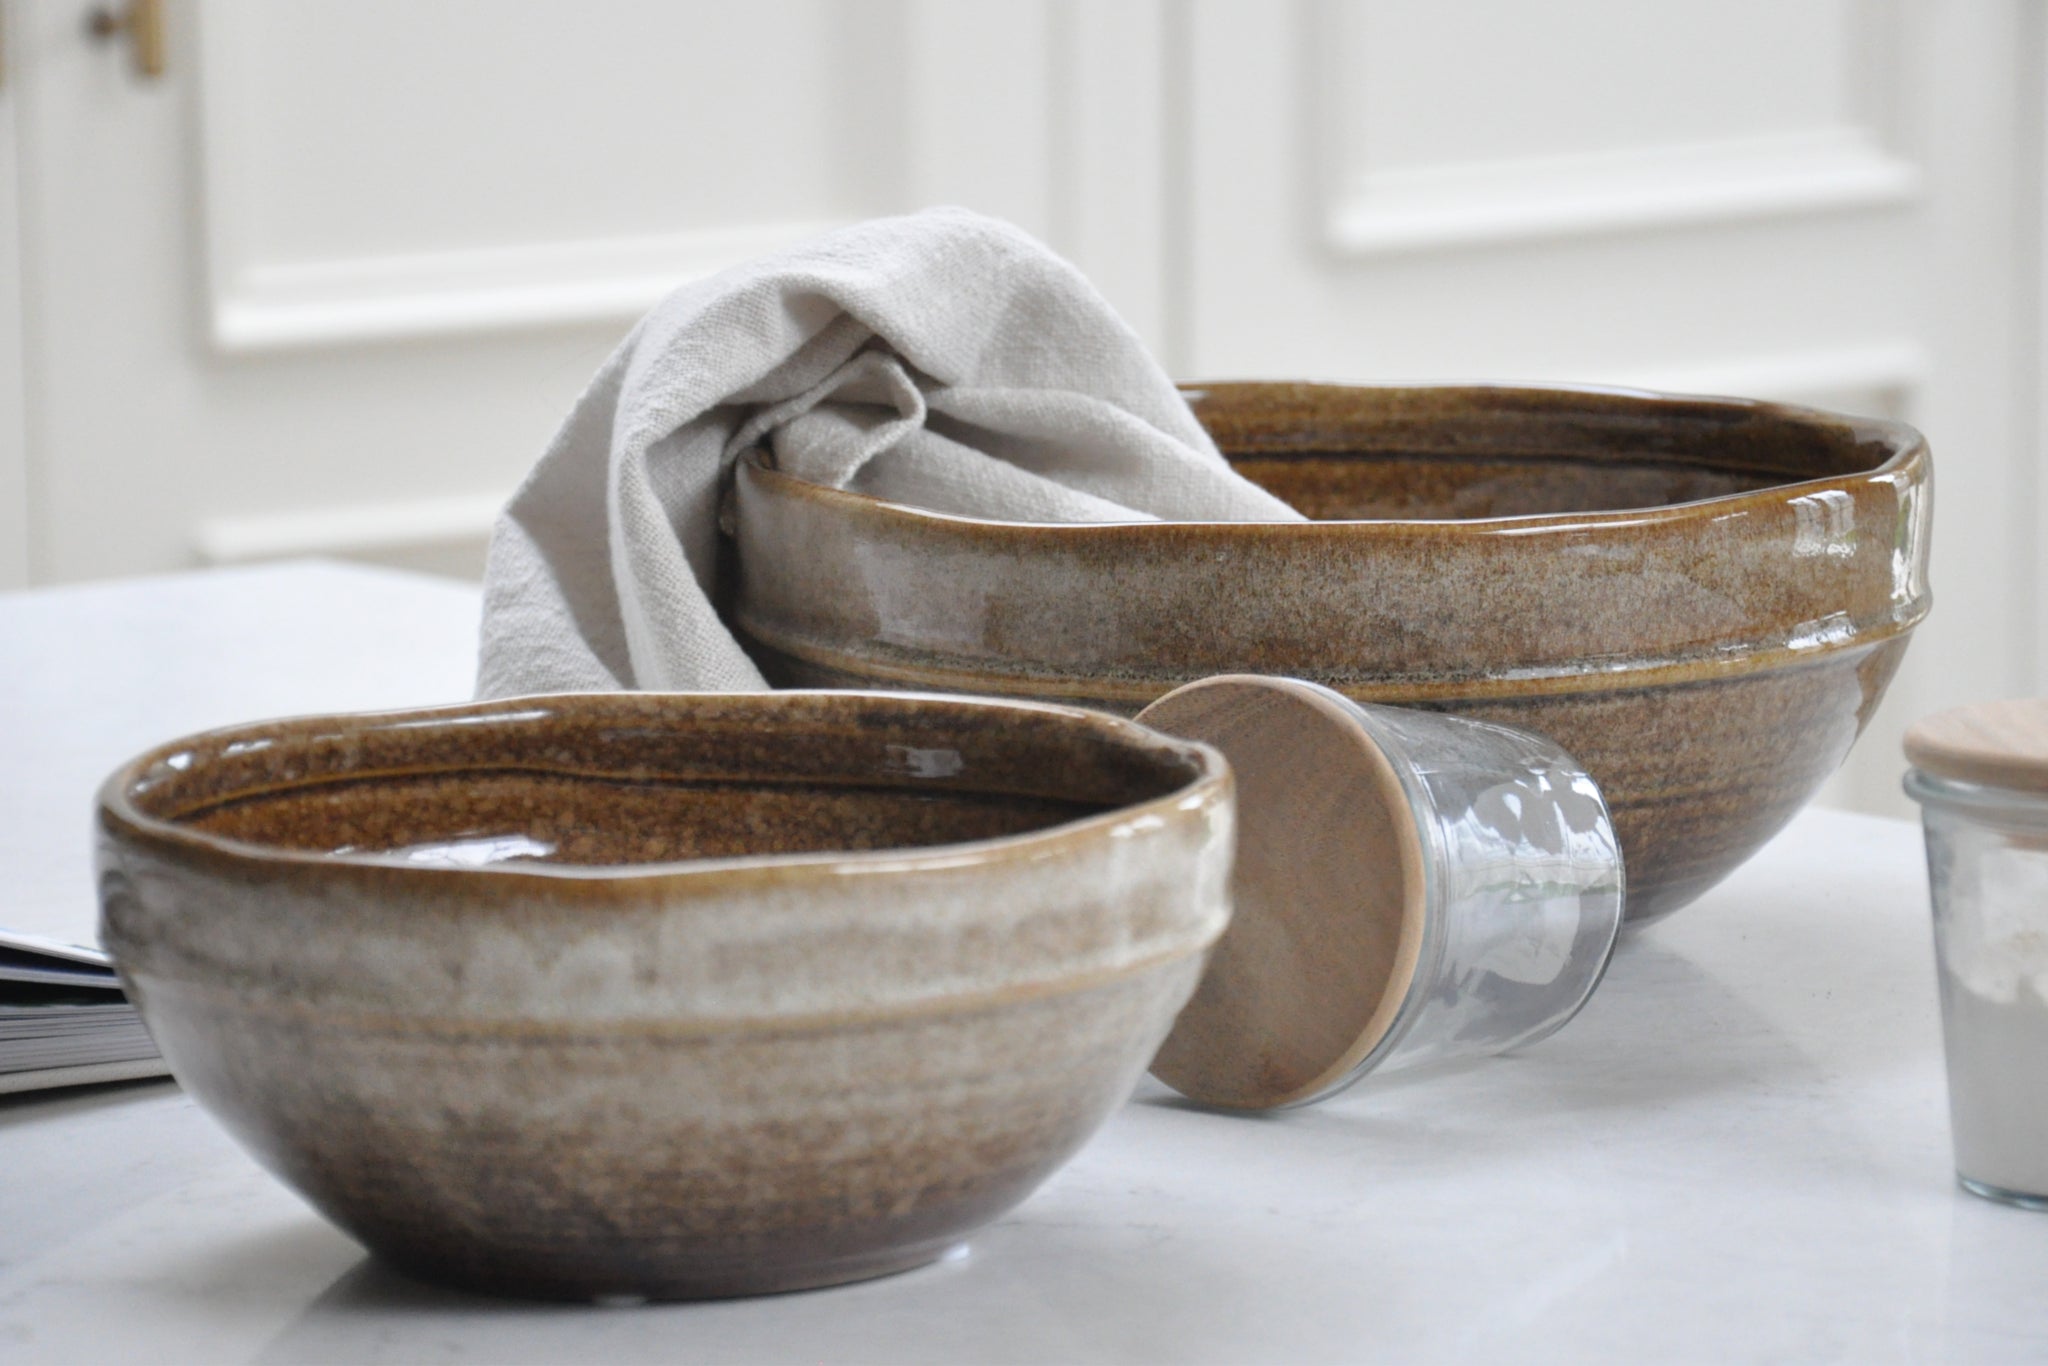 Kitchen still of brown bowls, beige tea towel, and rustic storage jars scattered on a granite countertop